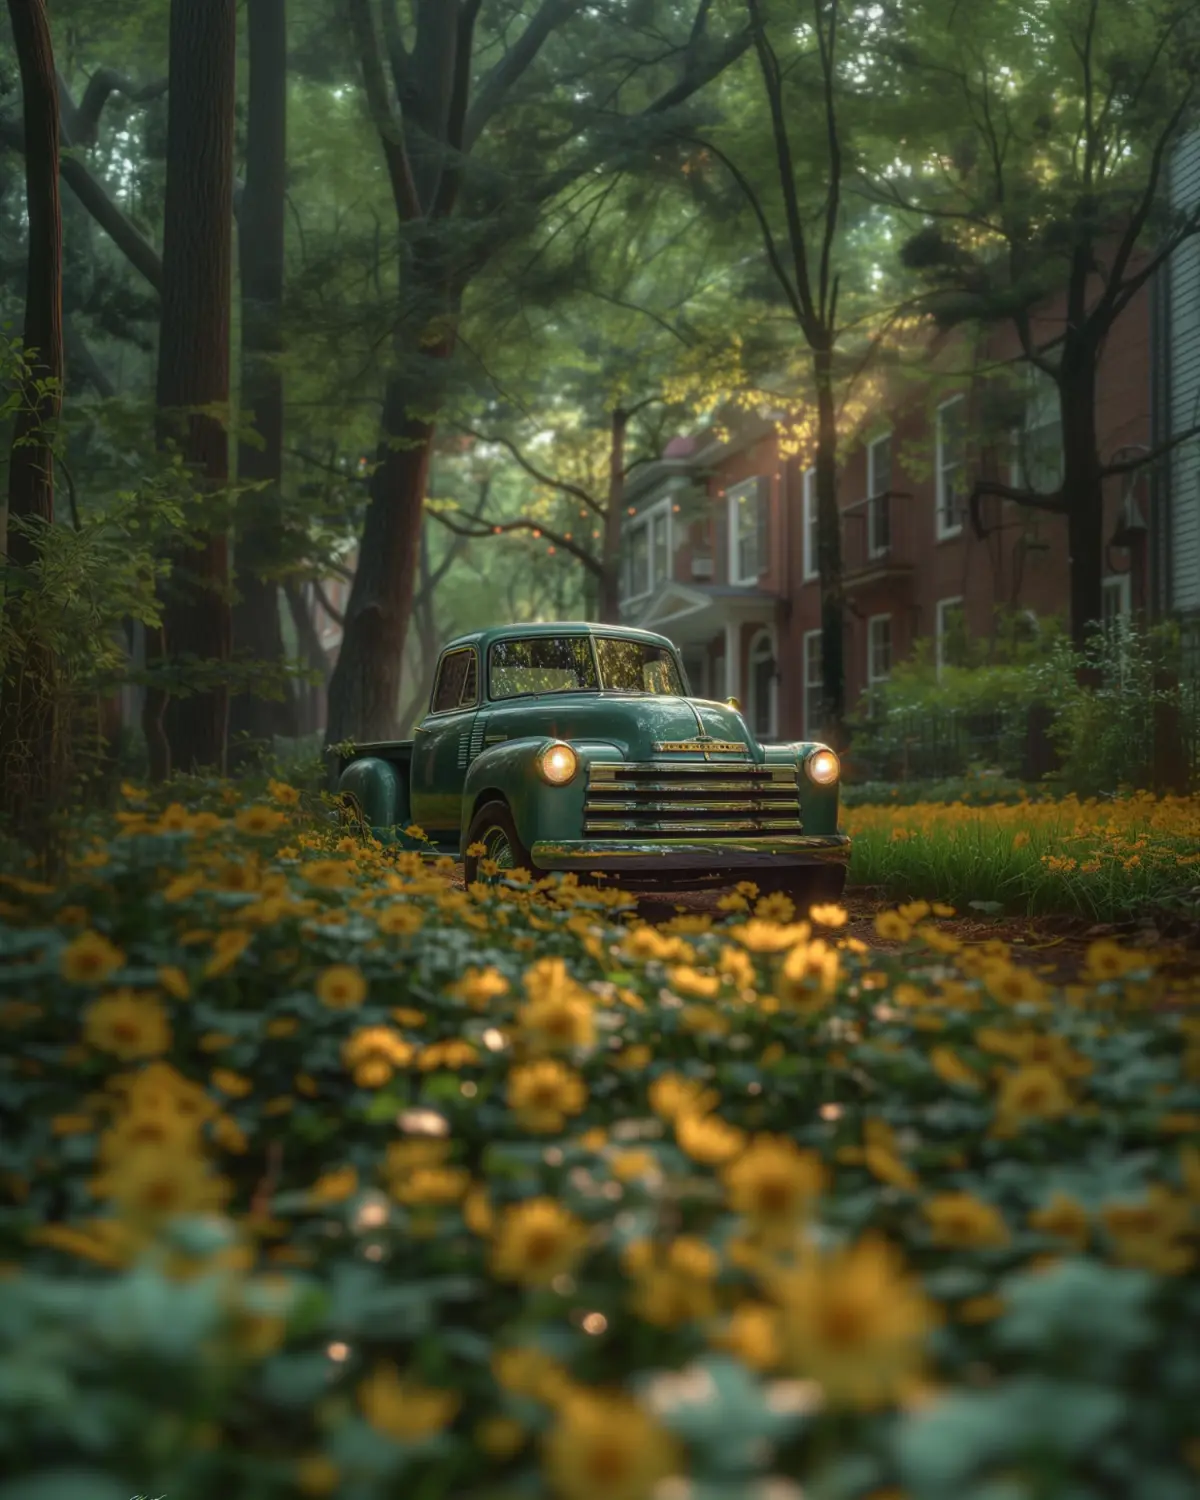 Classic Chevy truck with an eco-friendly electric conversion in an urban park